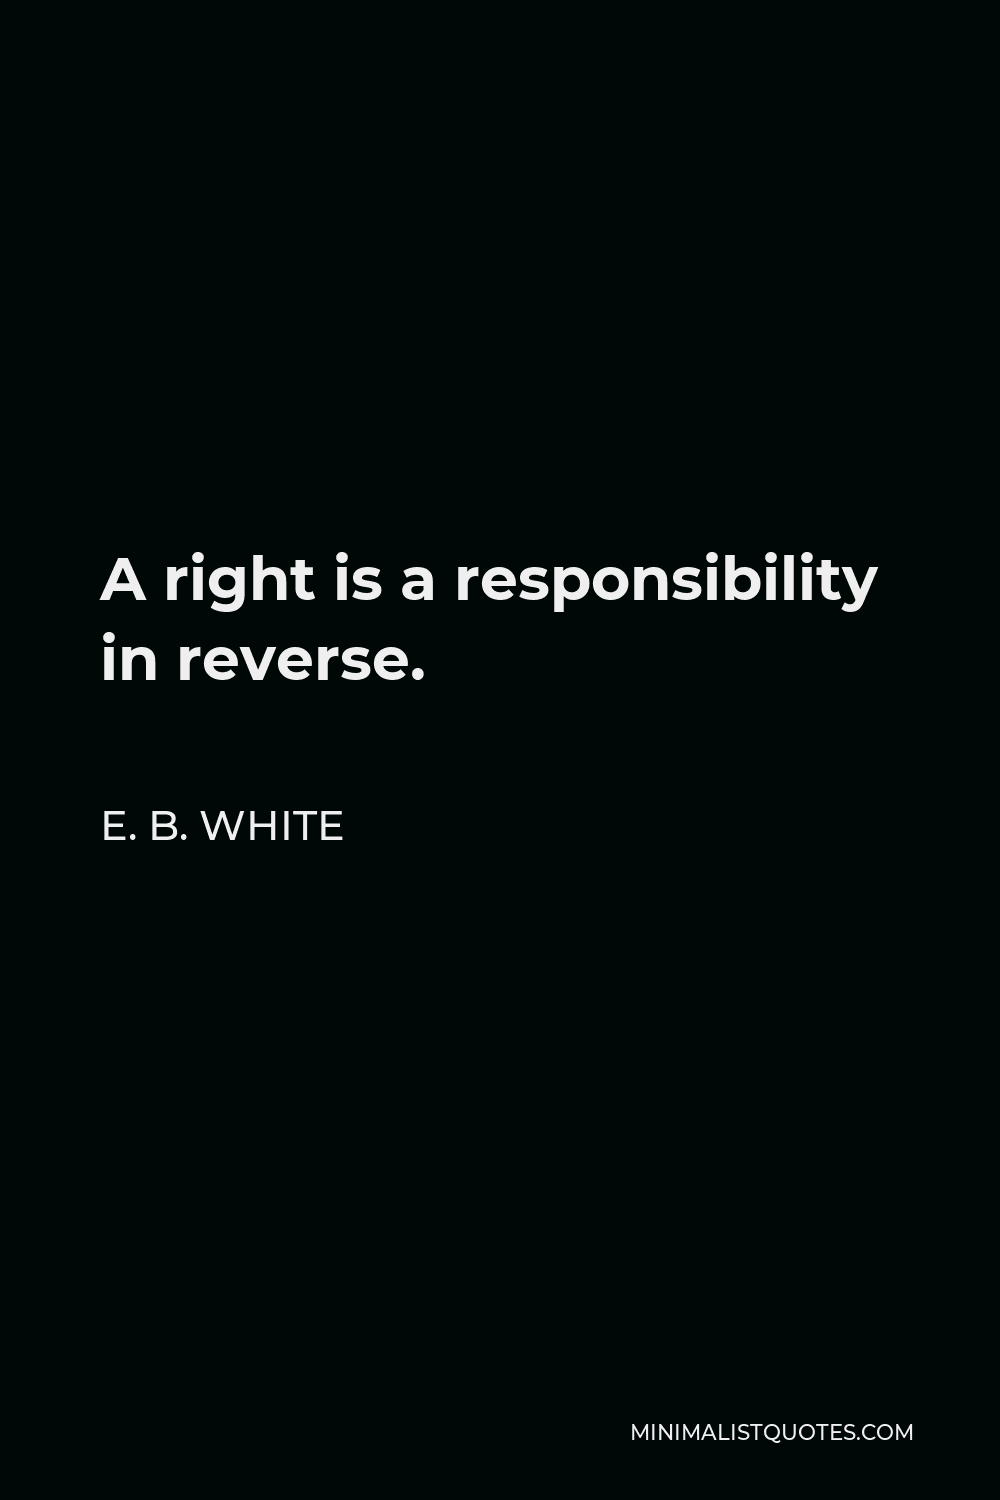 E. B. White Quote - A right is a responsibility in reverse.